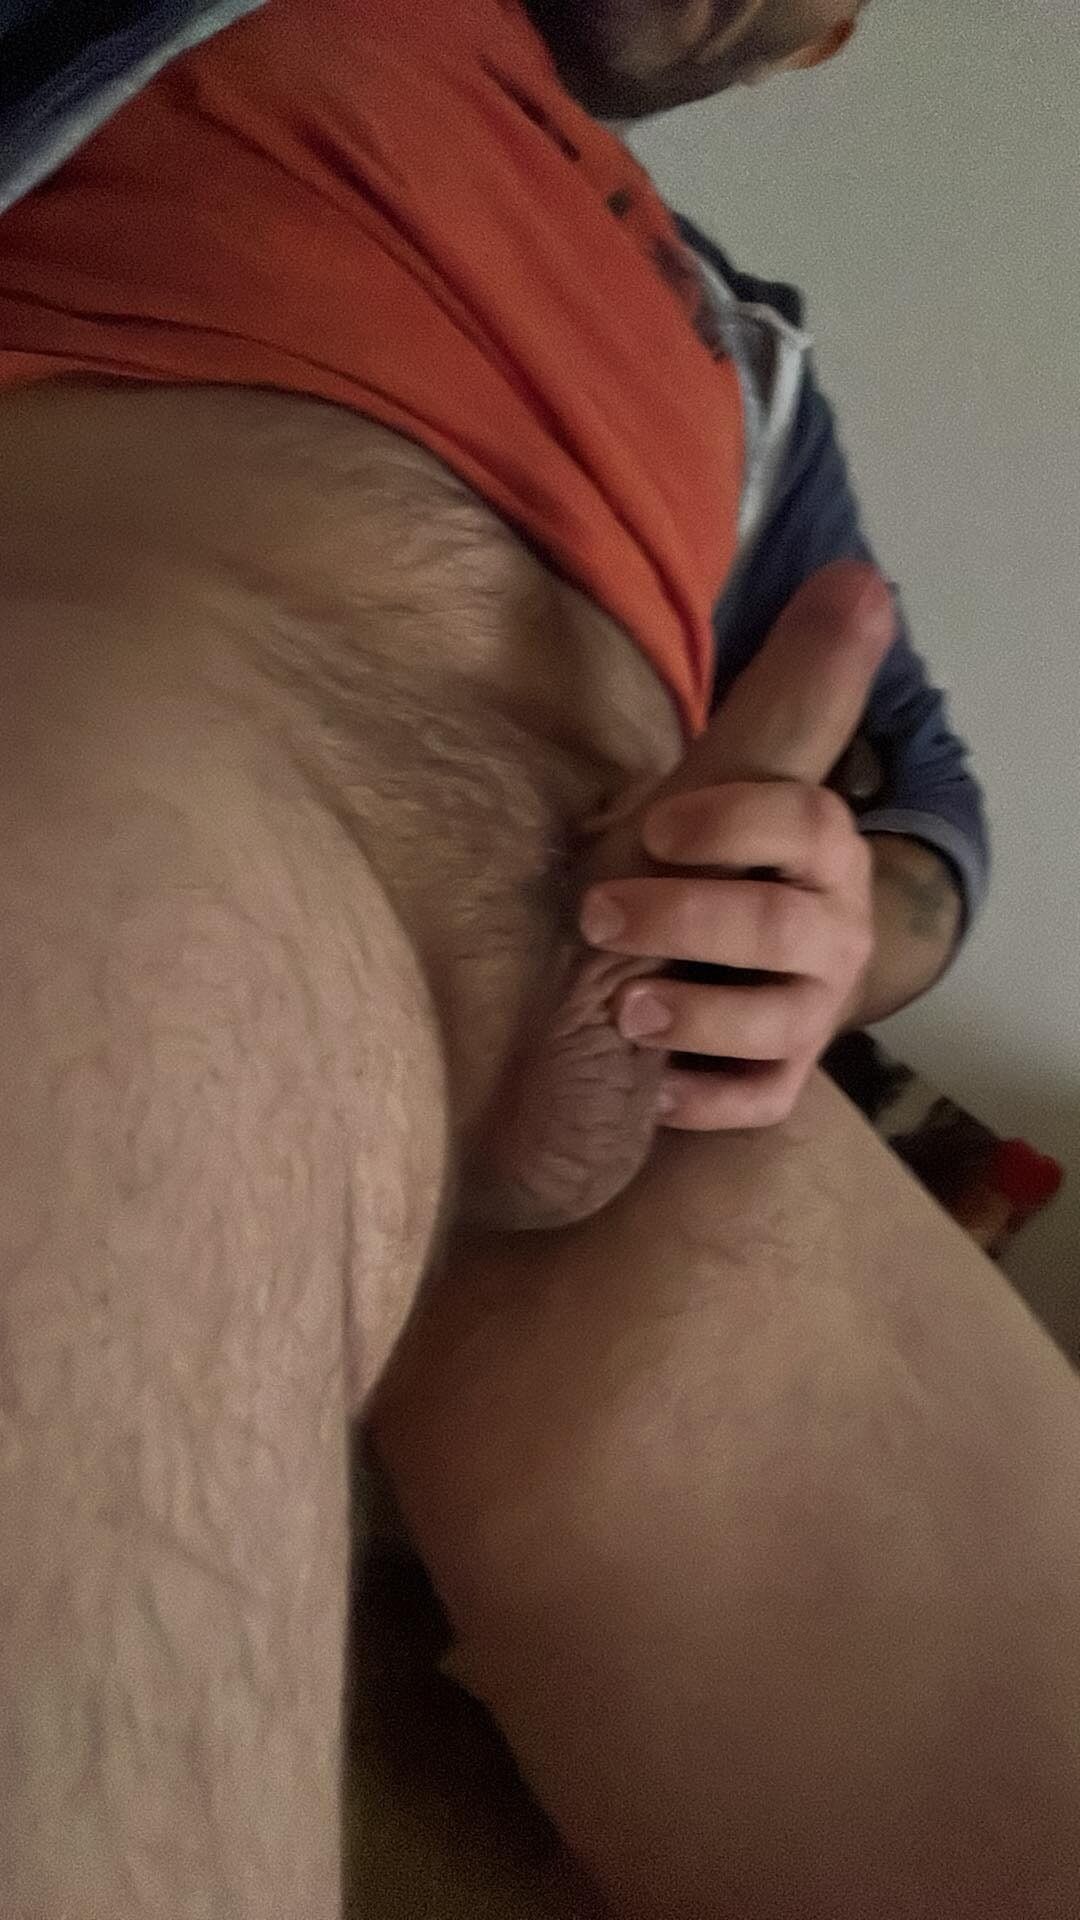 Me jerking off and my hairy ass #11